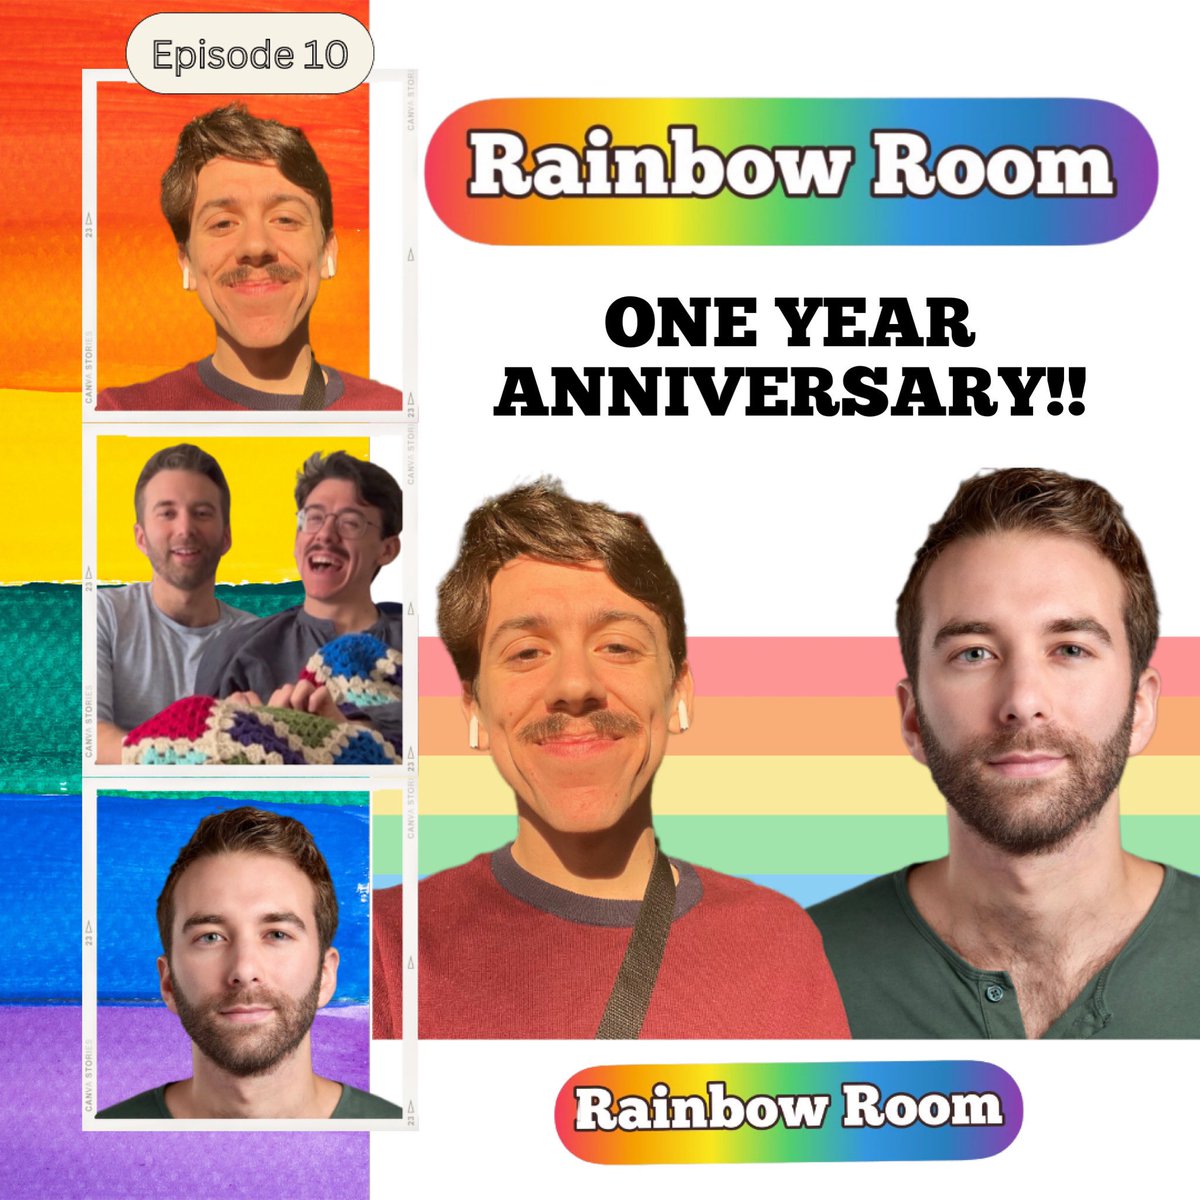 Season 2, Ep 10 out now. One year anniversary baby!!! Thank you so much to the fans and guests who have supported us along the way. #gaypodcast #anniversary